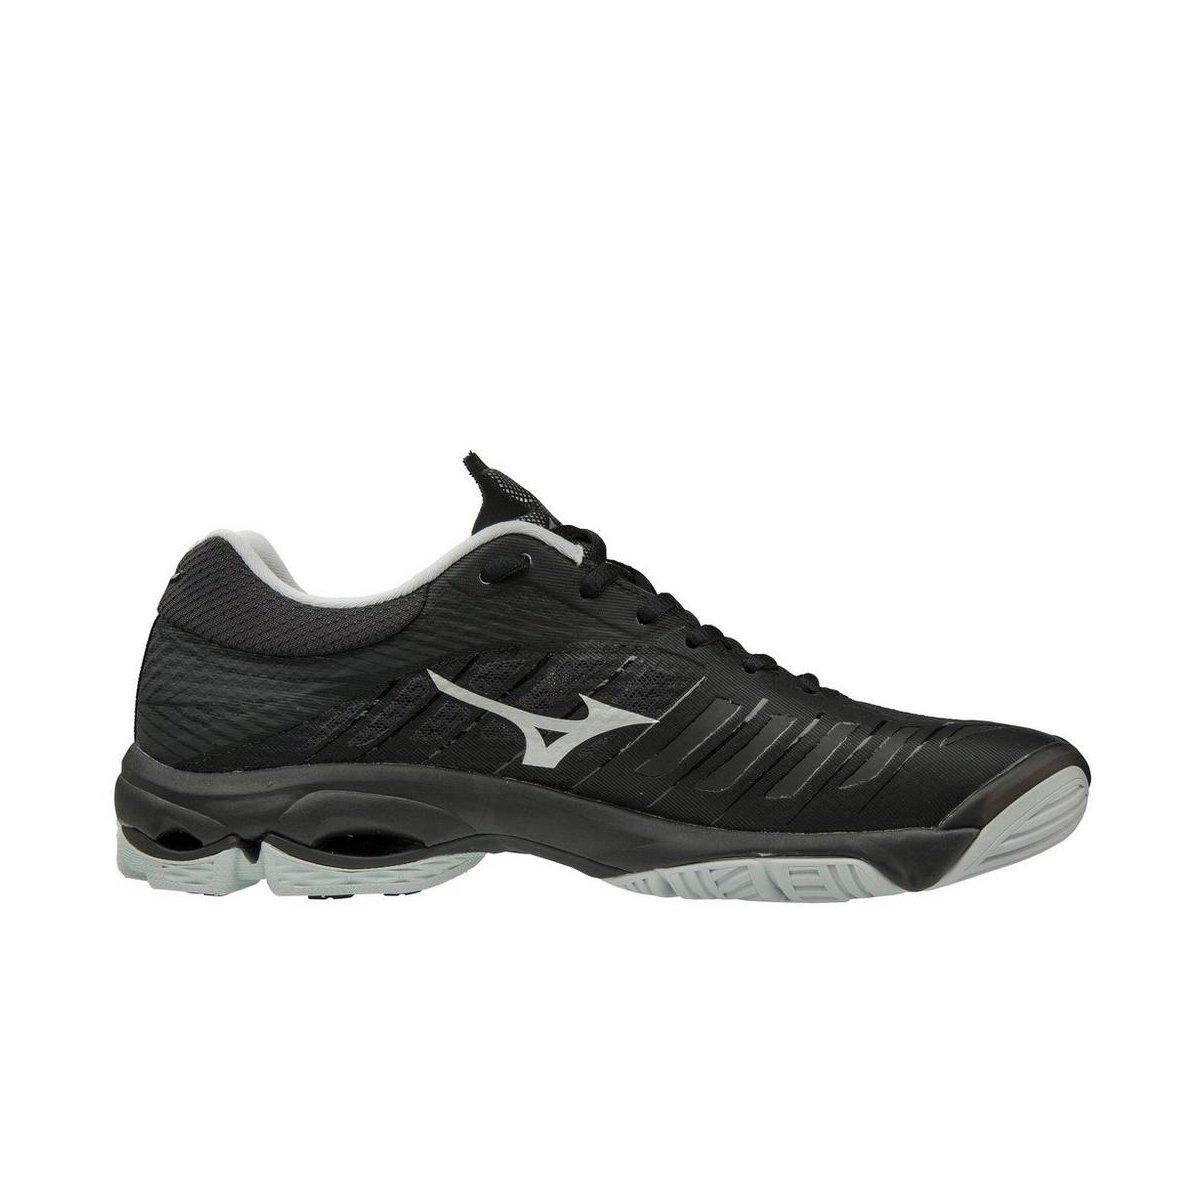 all black mizuno volleyball shoes